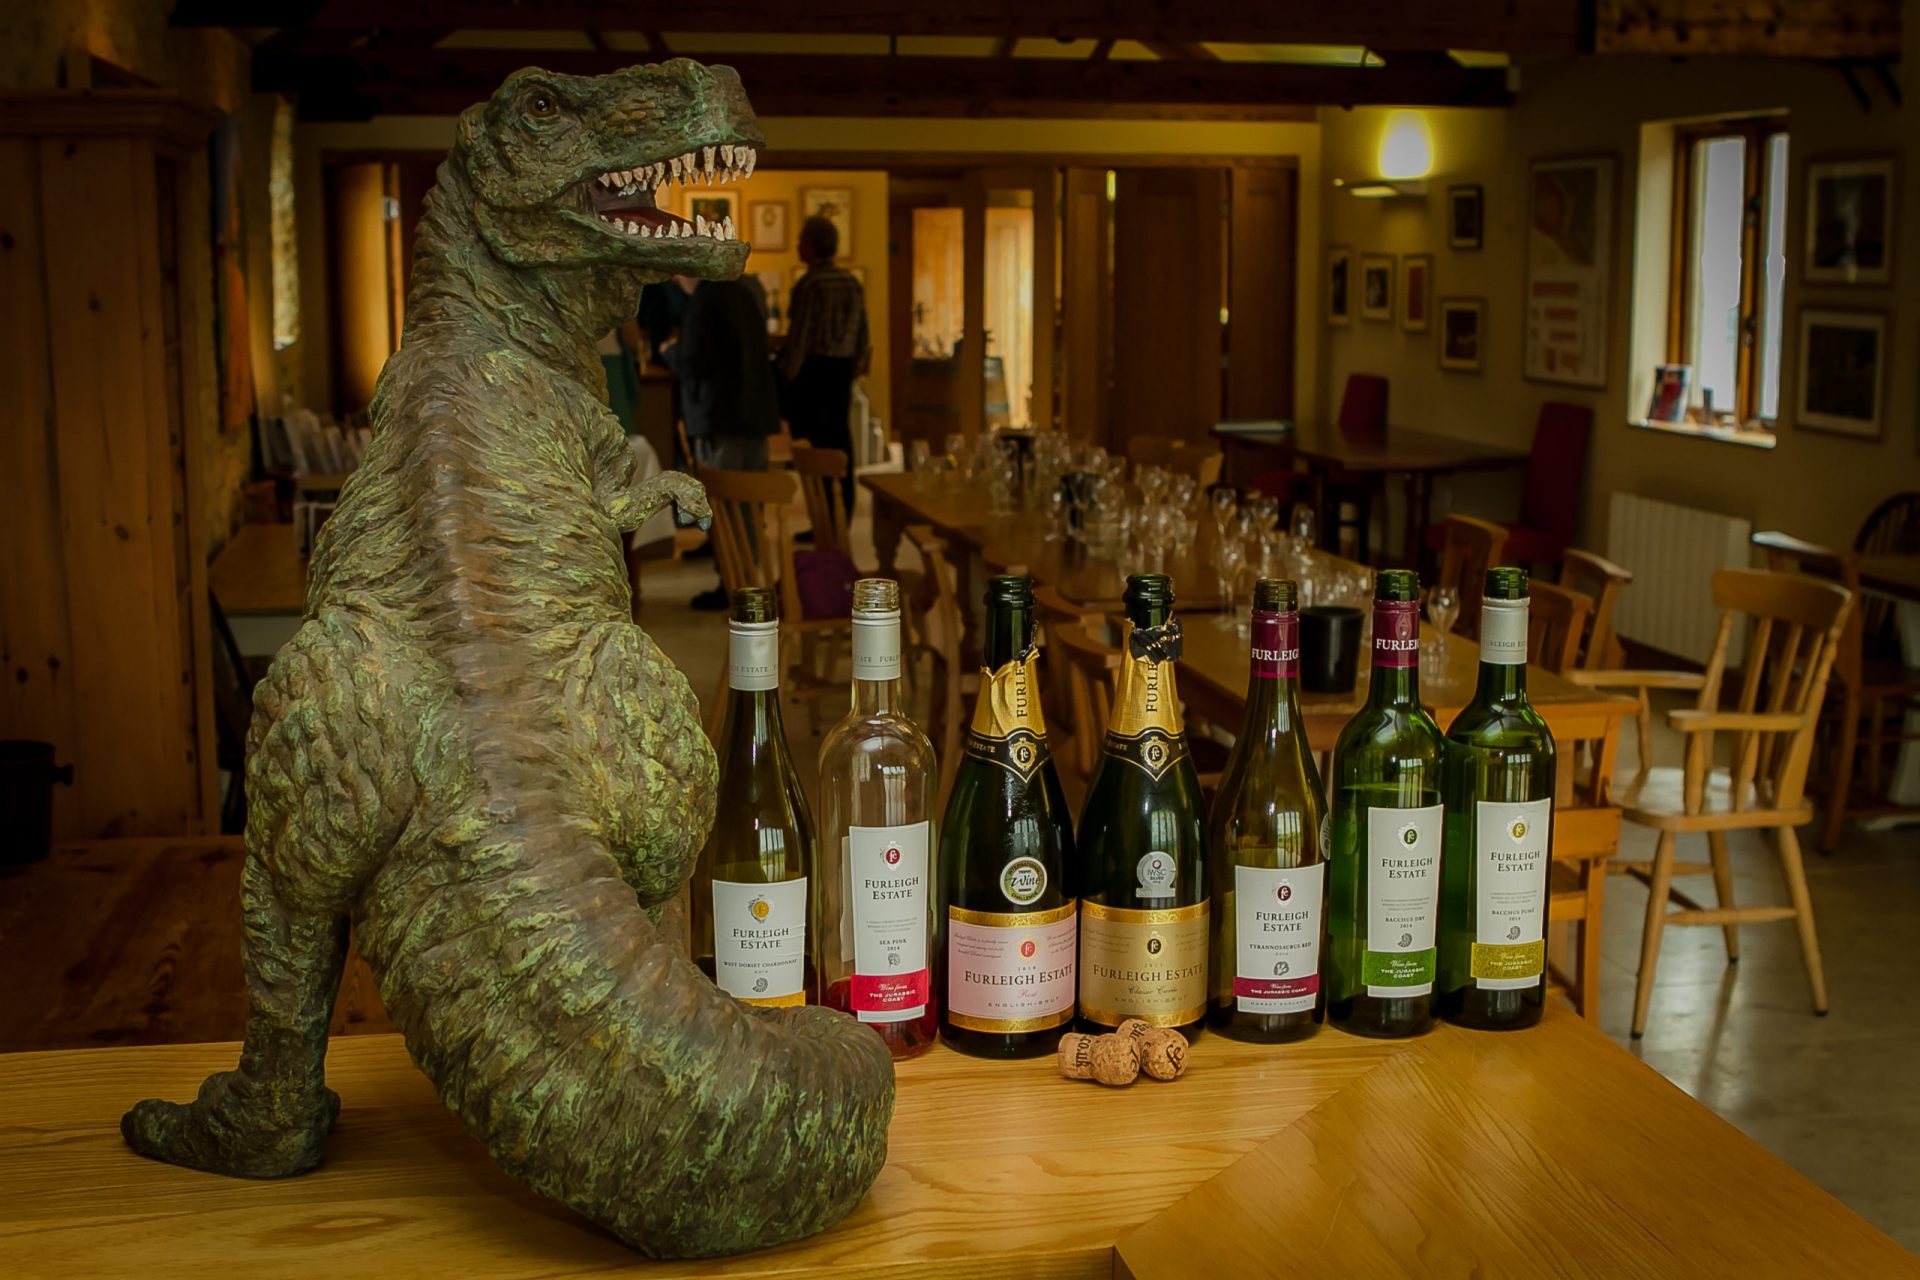 Picture of 7 assorted Furleigh Estate bottles on a wooden table with a dinosaur figurine beside them. 